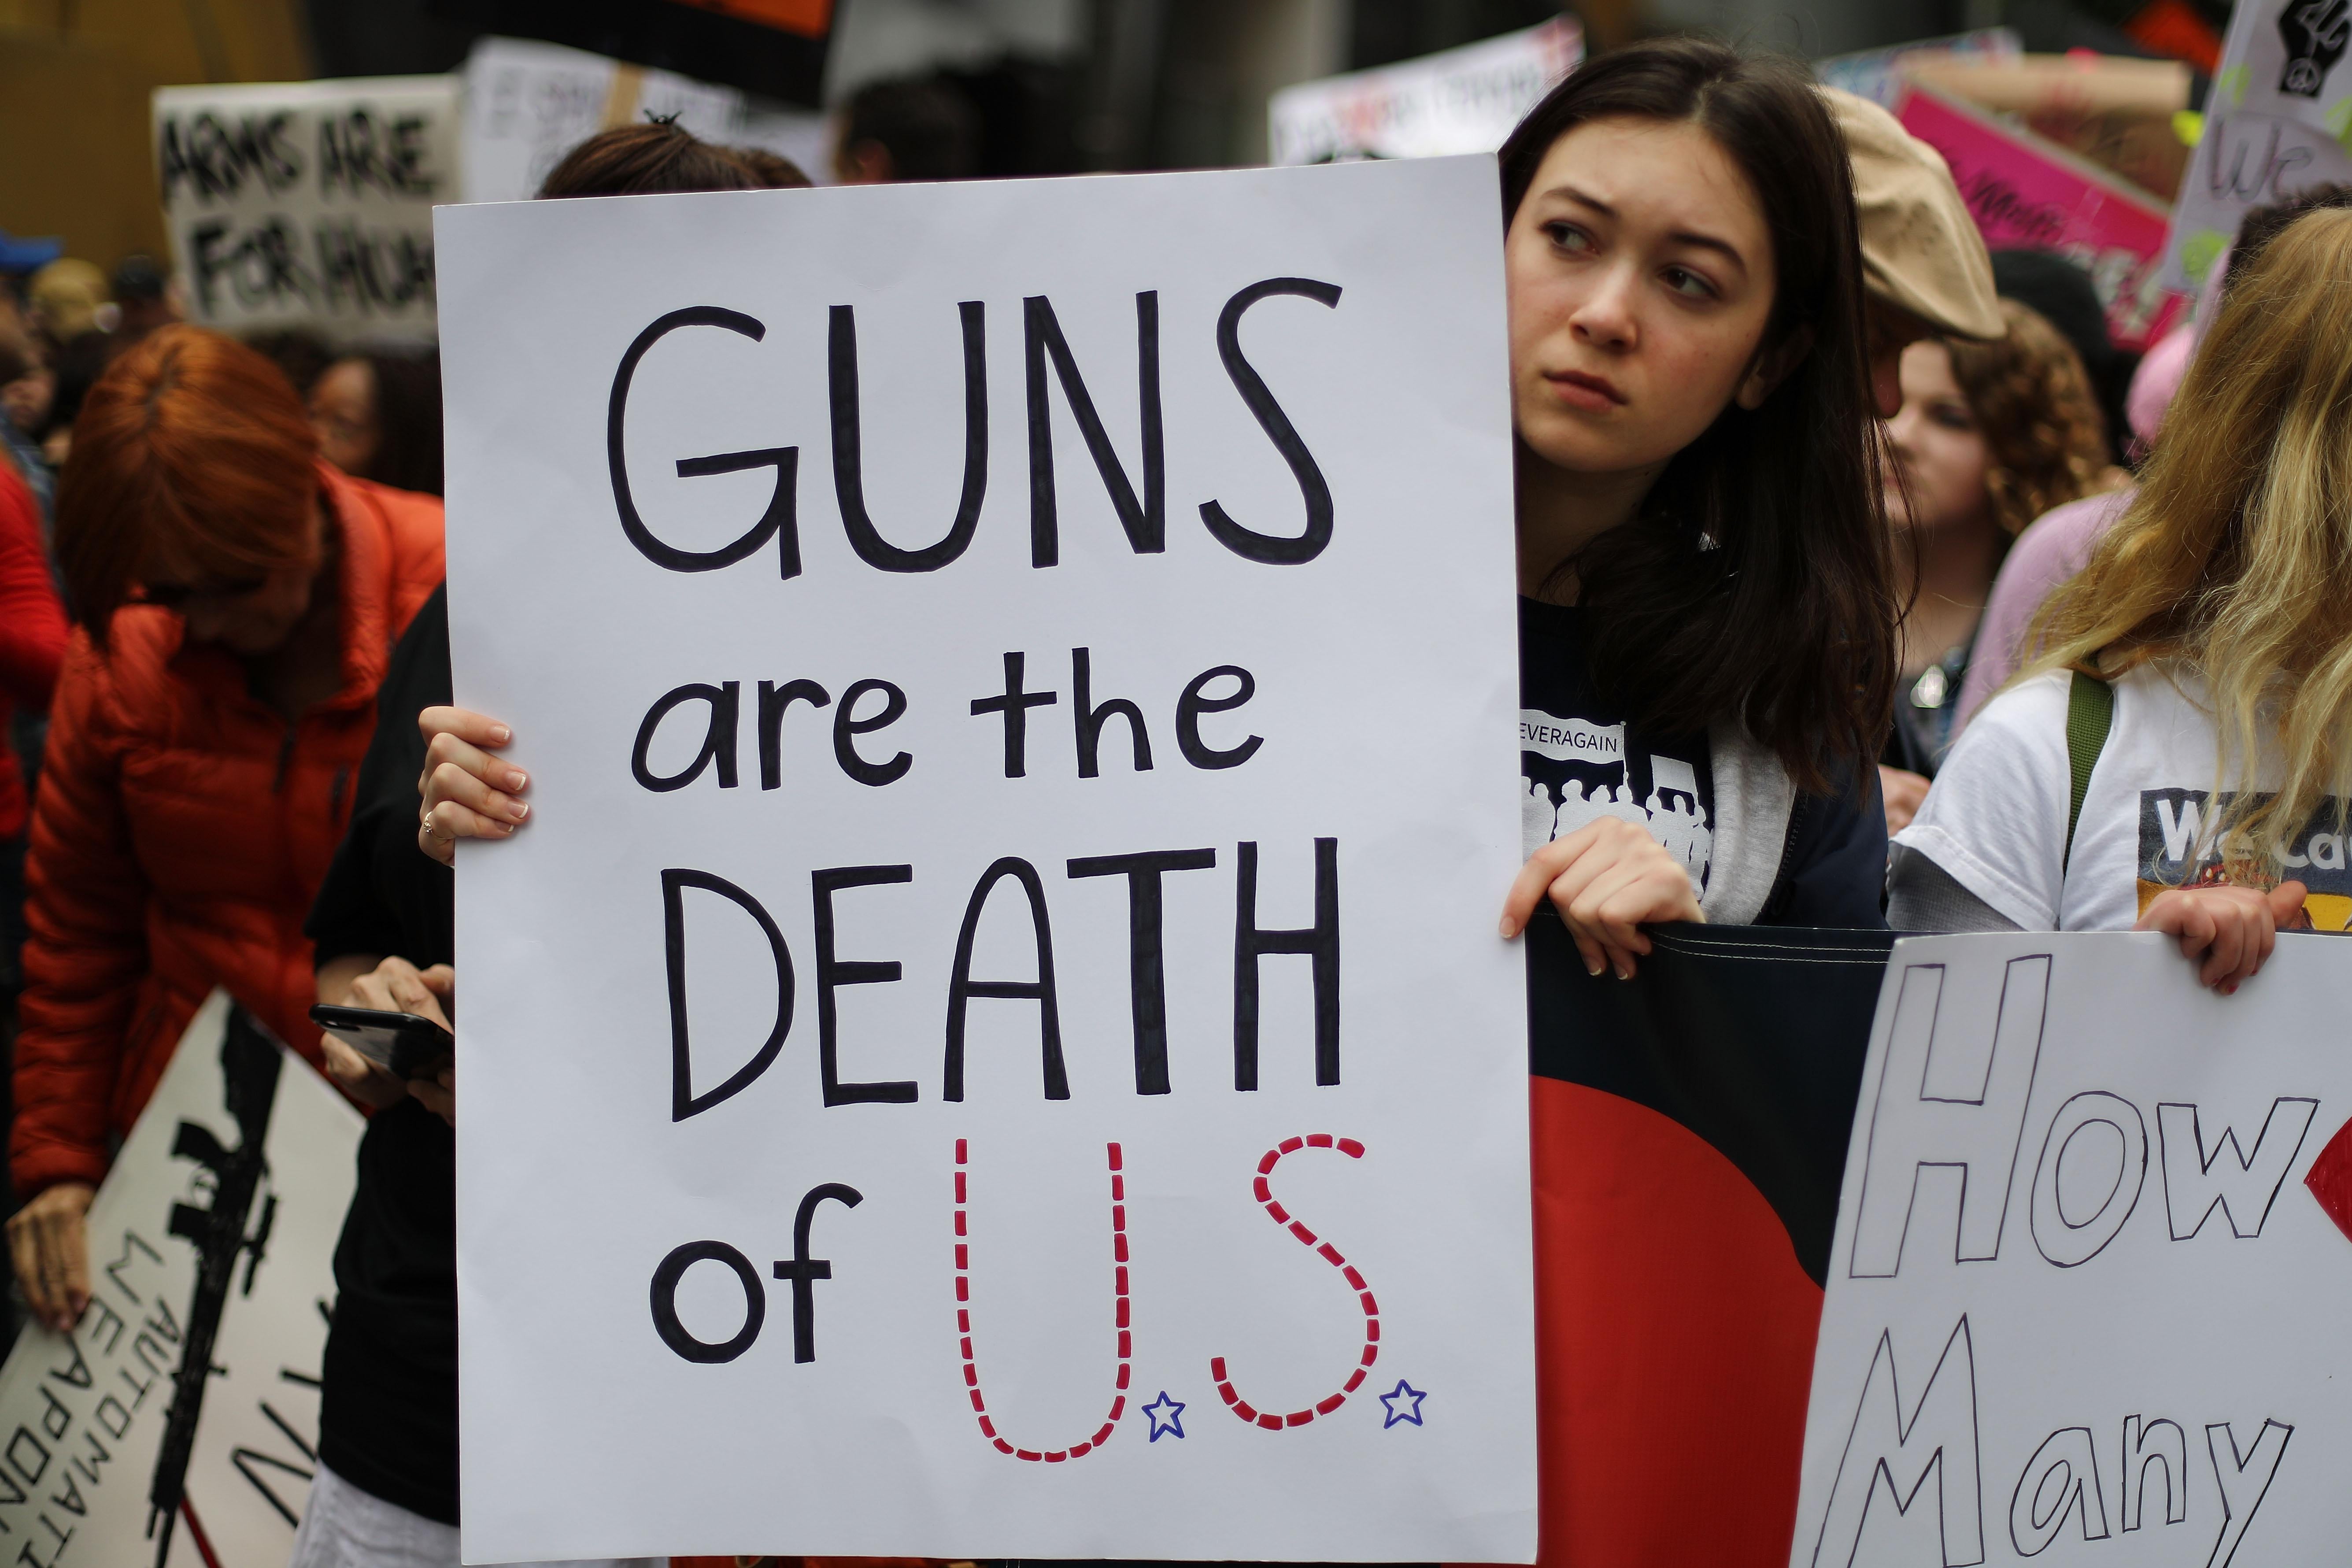 A sign reads, "Guns are the death of U.S."